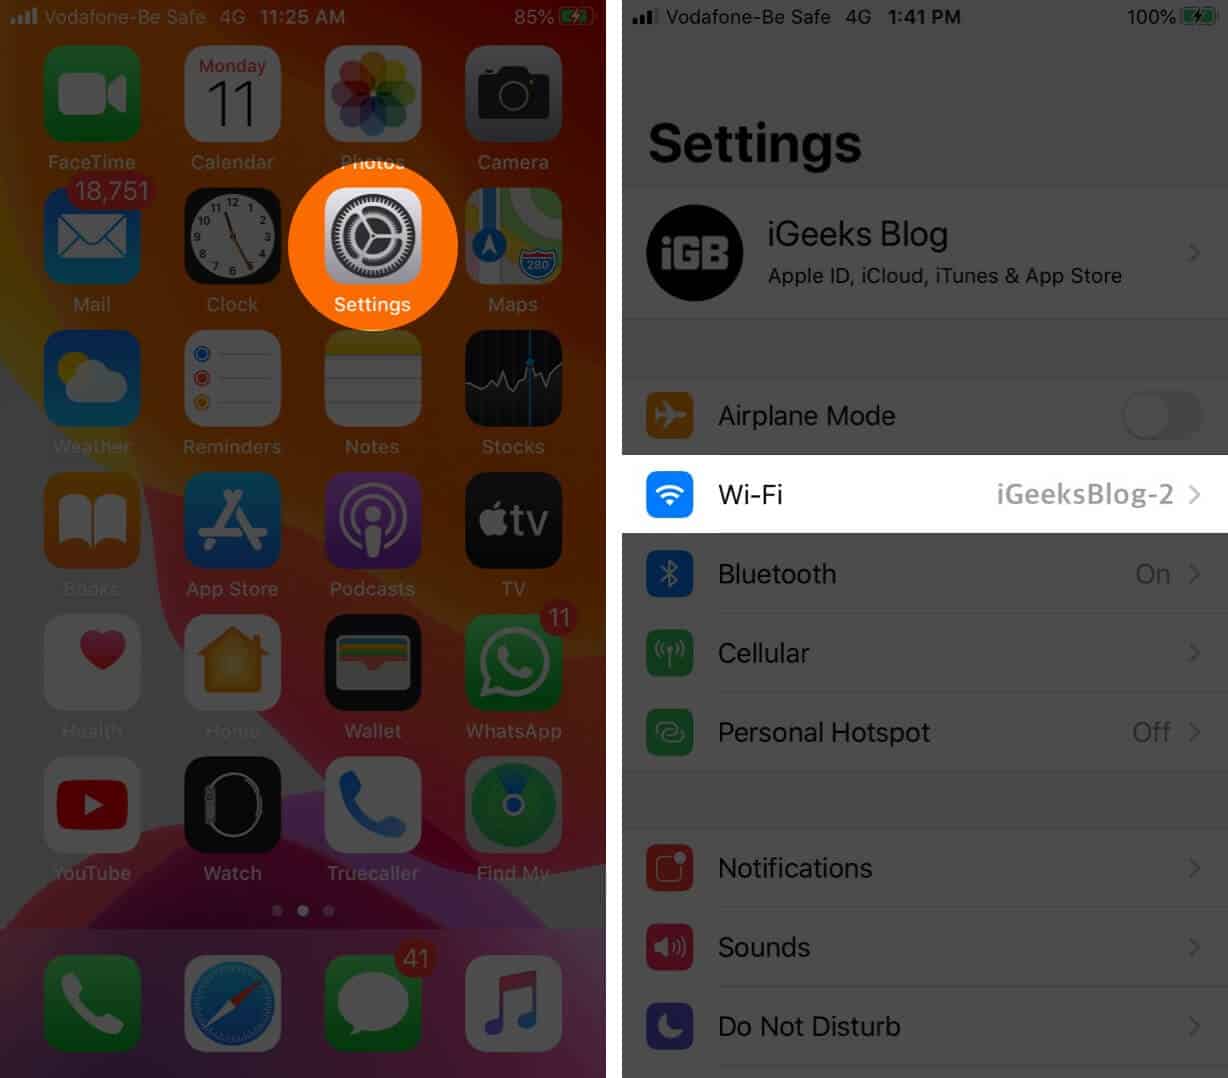 Open Settings and Tap on Wi-Fi